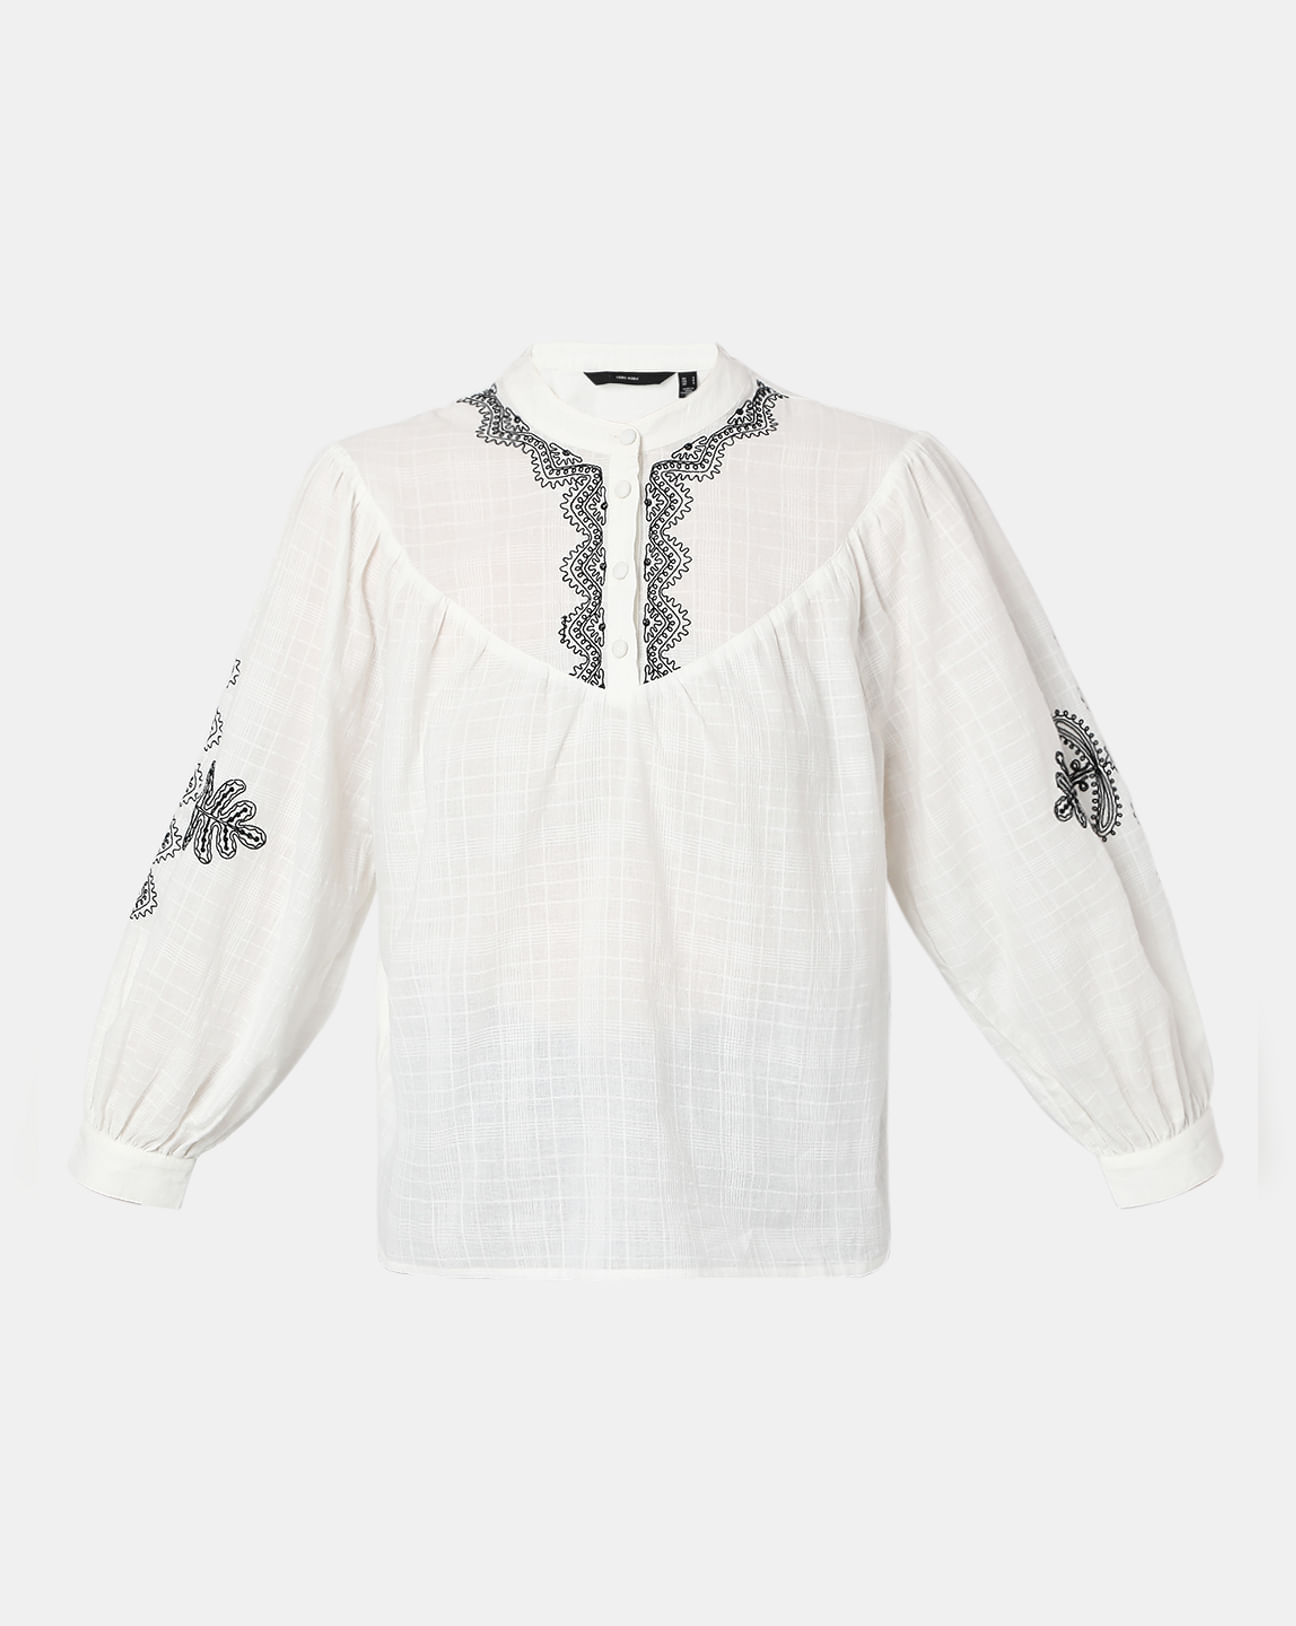 Buy White Cotton Embroidered Top For Women Online in India | VeroModa